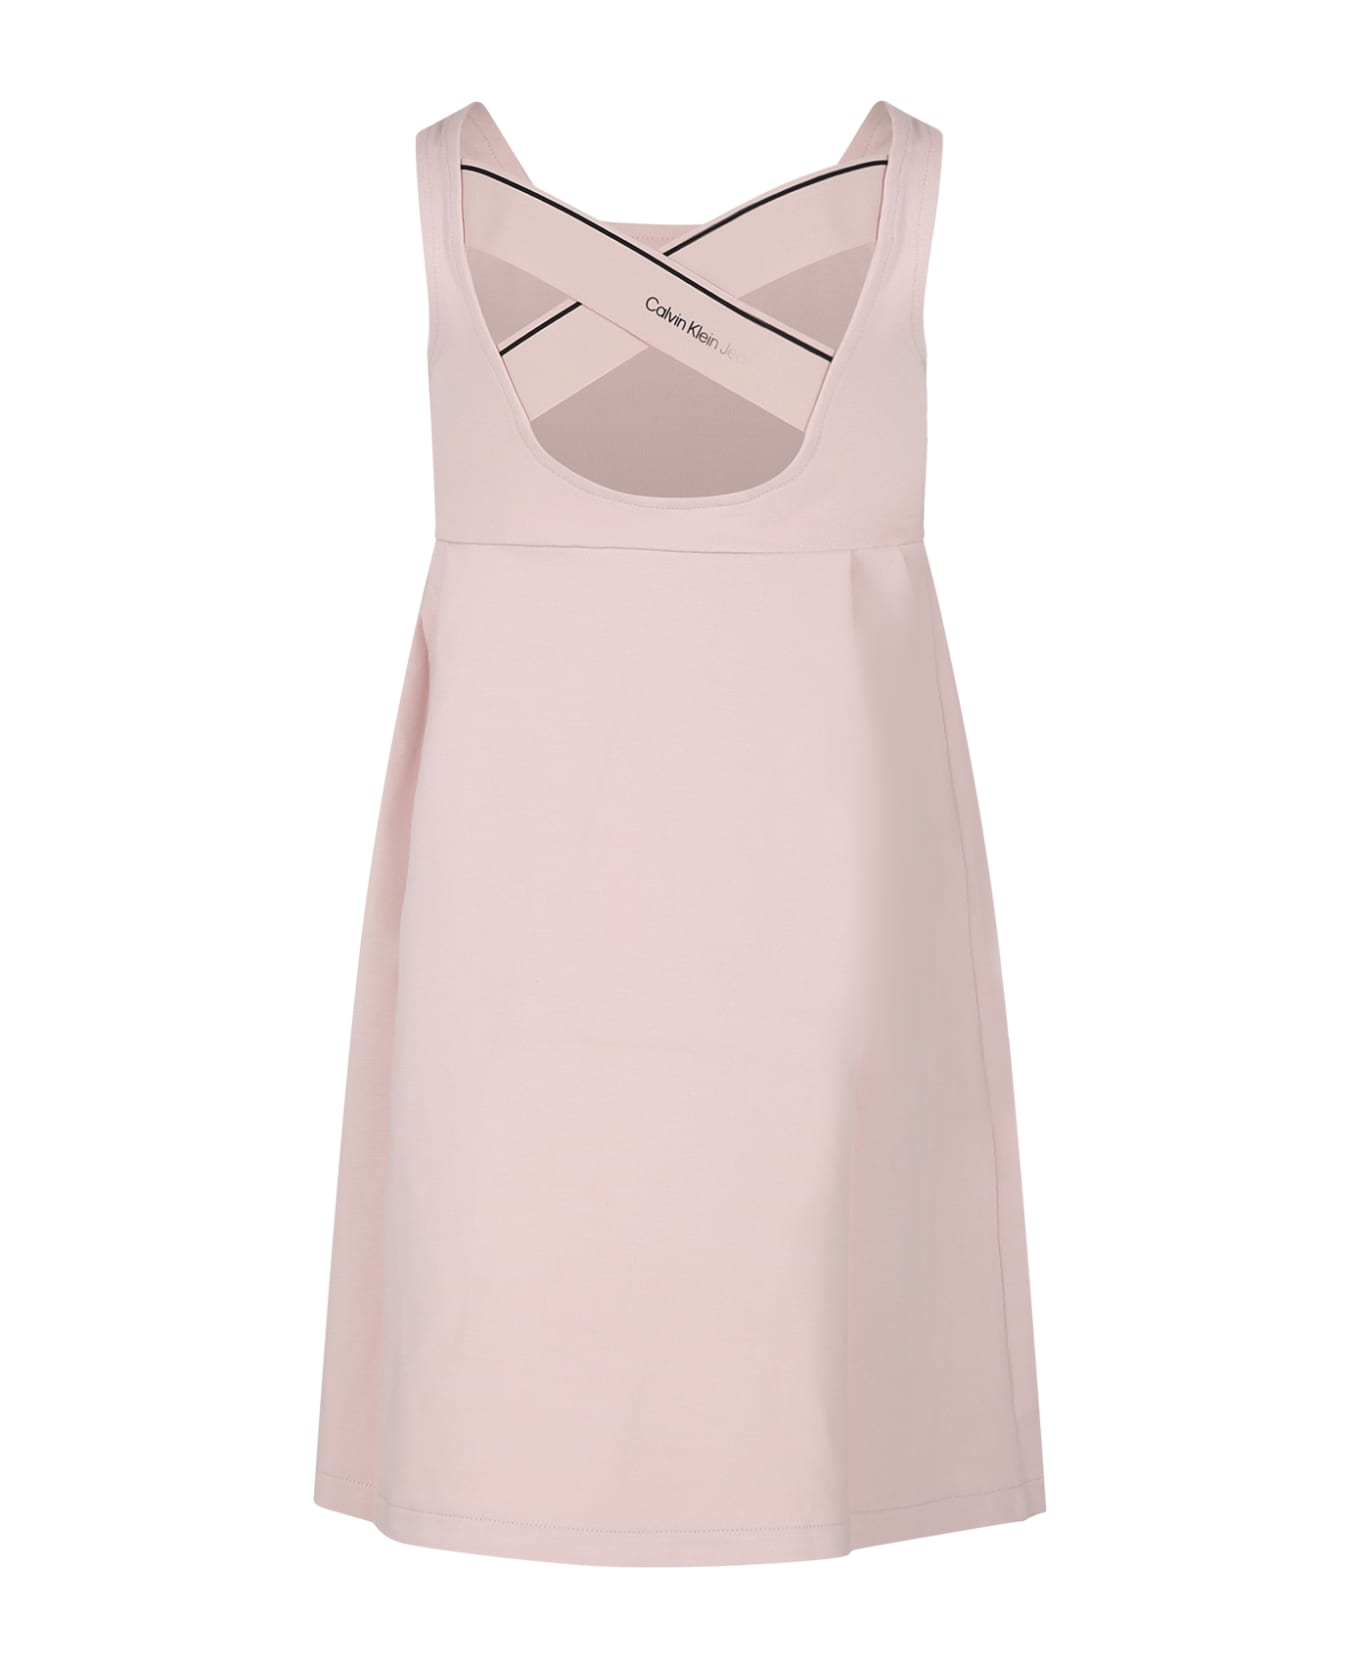 Calvin Klein Pink Dress For Girl With Logo - Pink